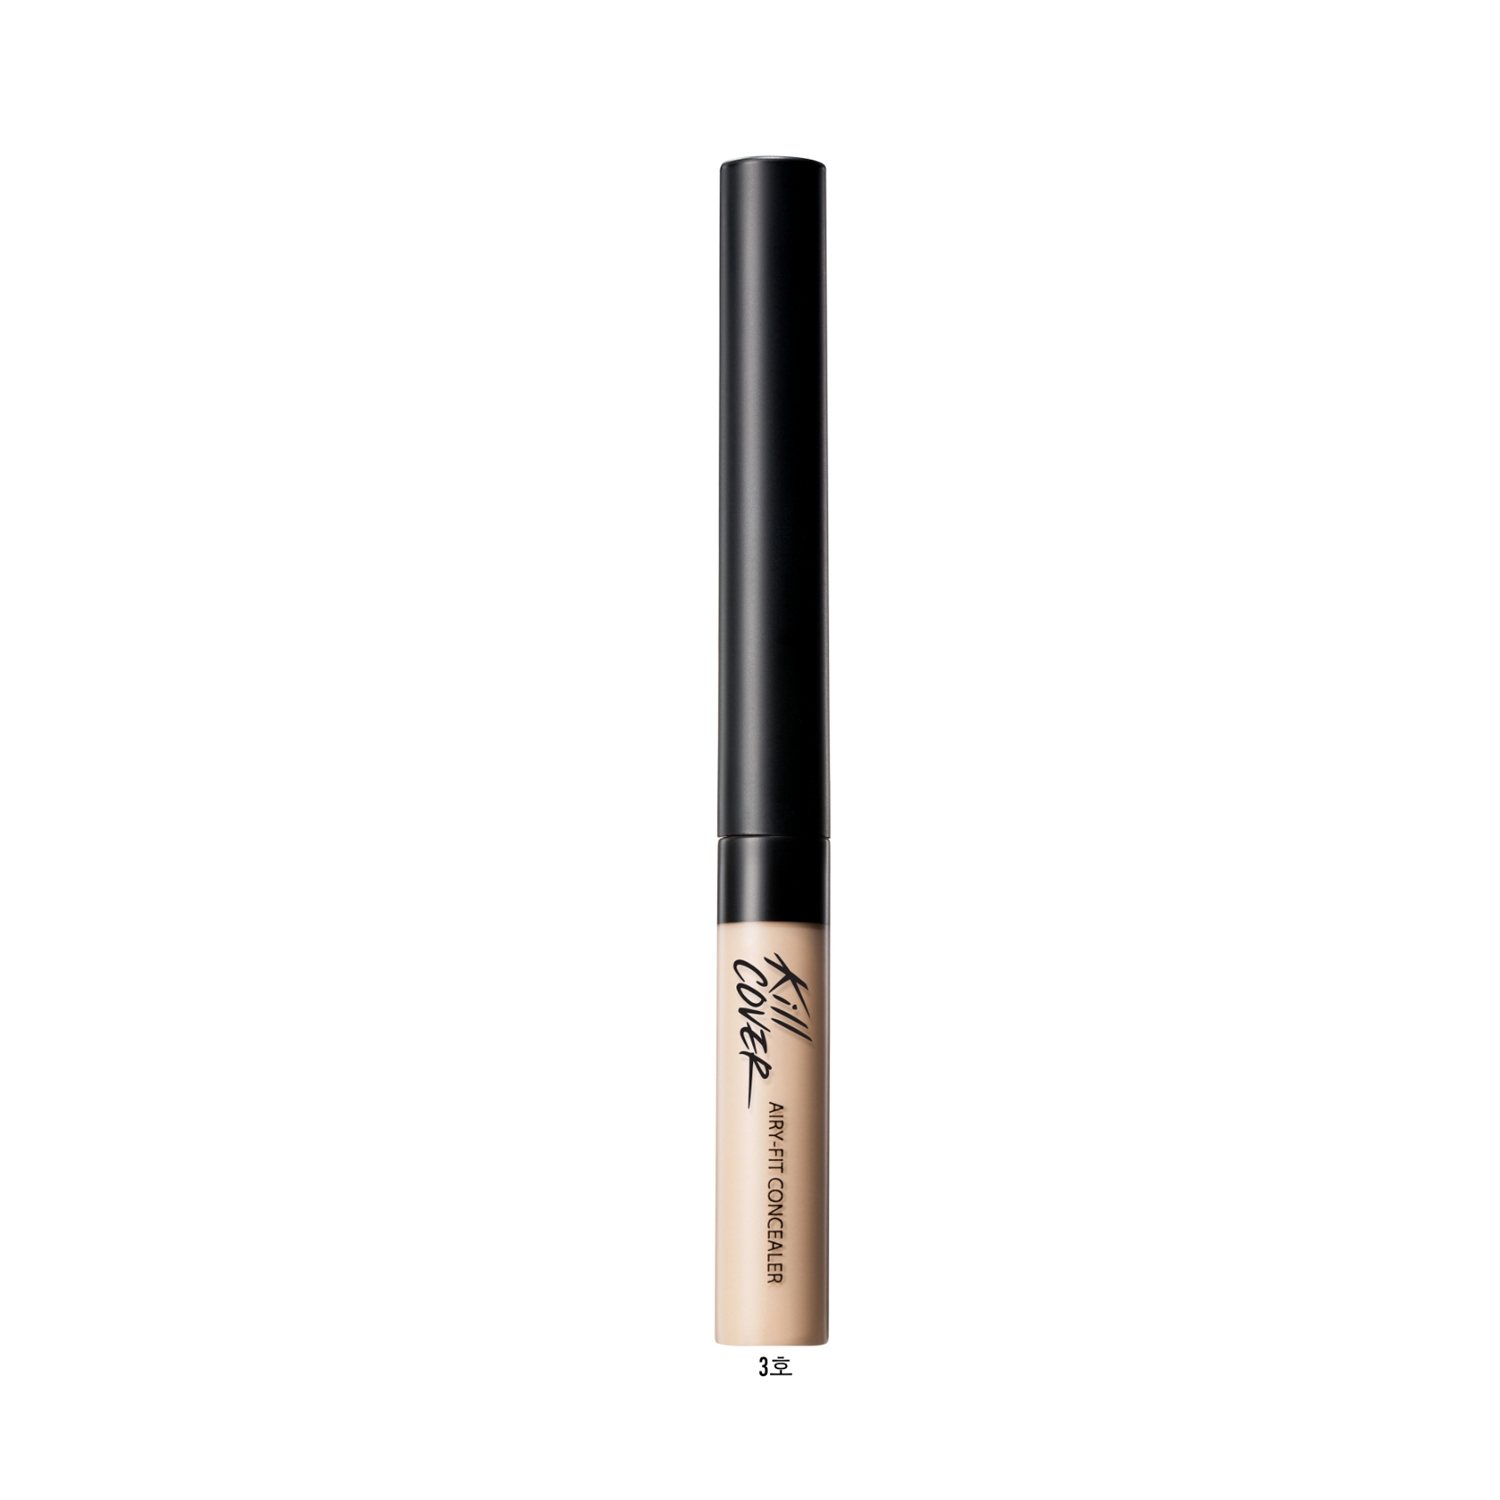 Clio | Clio Kill Cover Airy-Fit Concealer - 3 Linen (3g)